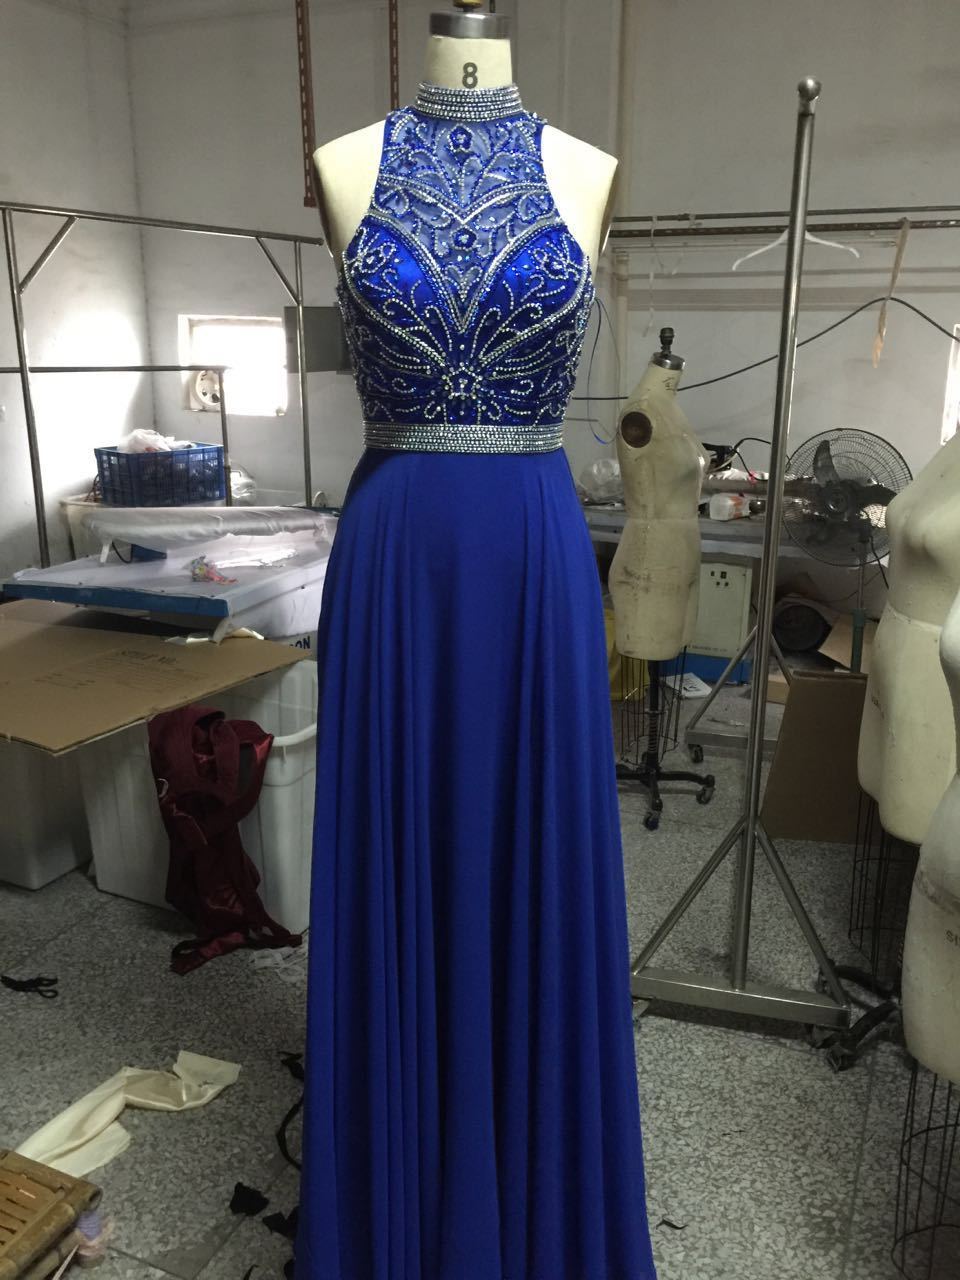 Floor Length Royal Blue Chiffon Formal Dresses Featuring Beaded Bodice With Halter Neckline -- Long Elegant Prom Dress, Sexy Beaded Evening Gown